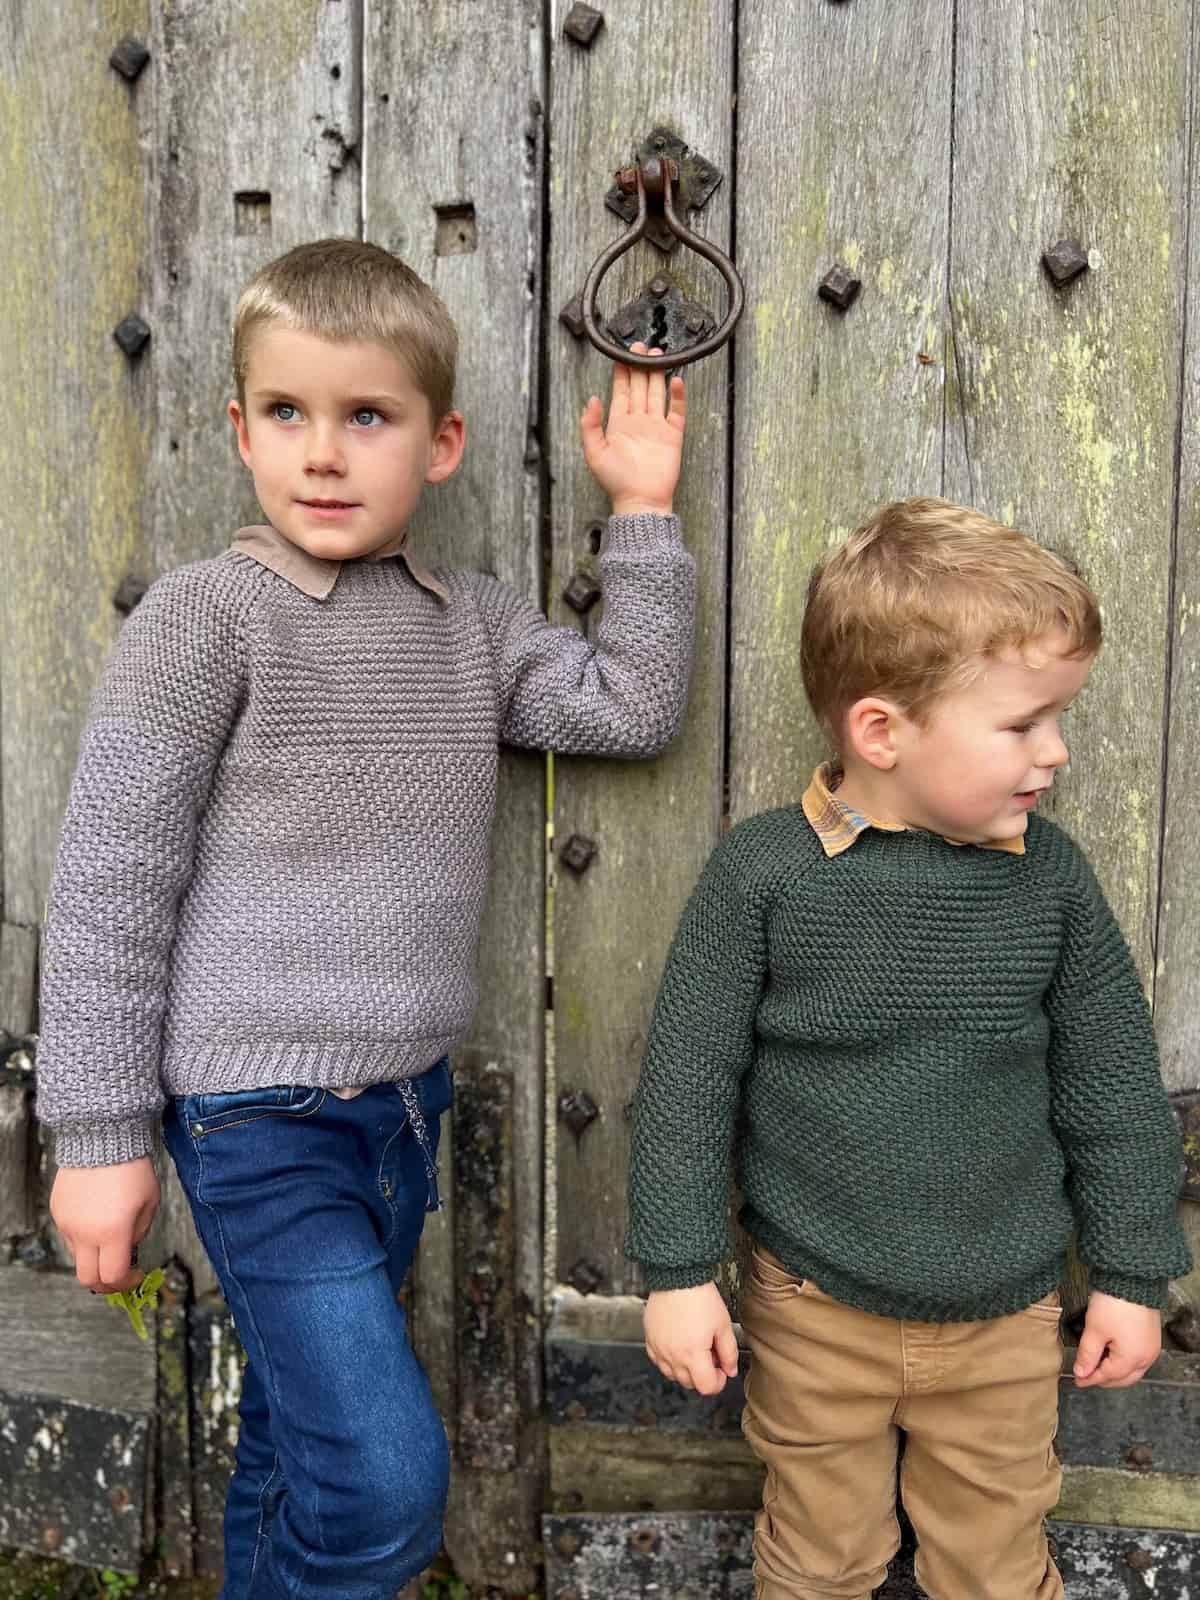 Crochet sweater pattern for boys and girls on a toddler and 5 year old boy in grey and green.